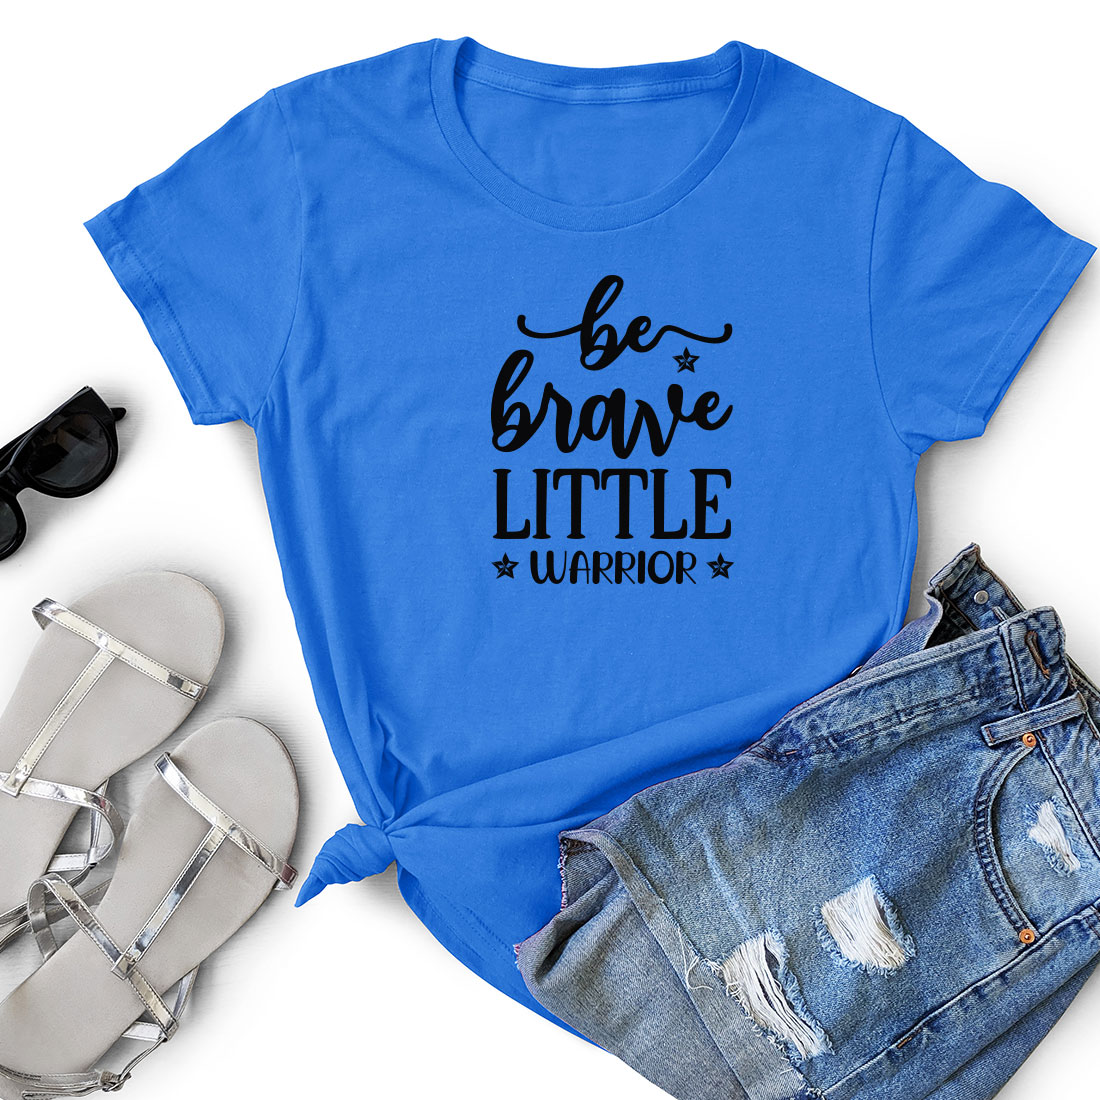 T - shirt that says be brave little warrior.